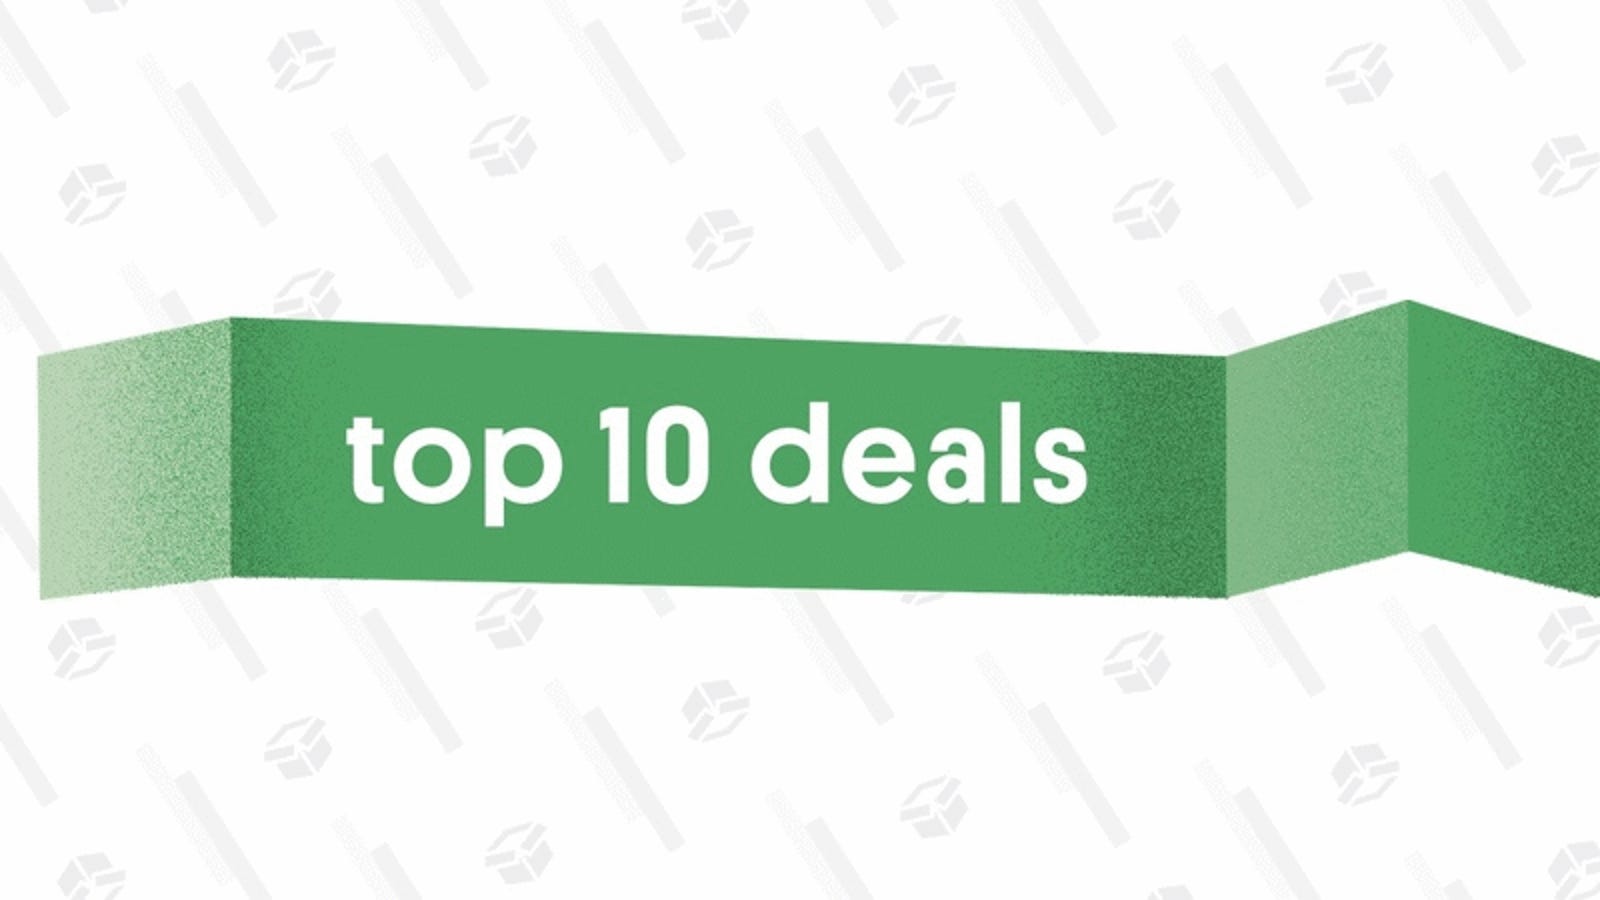 photo of The 10 Best Deals of August 15, 2018 image